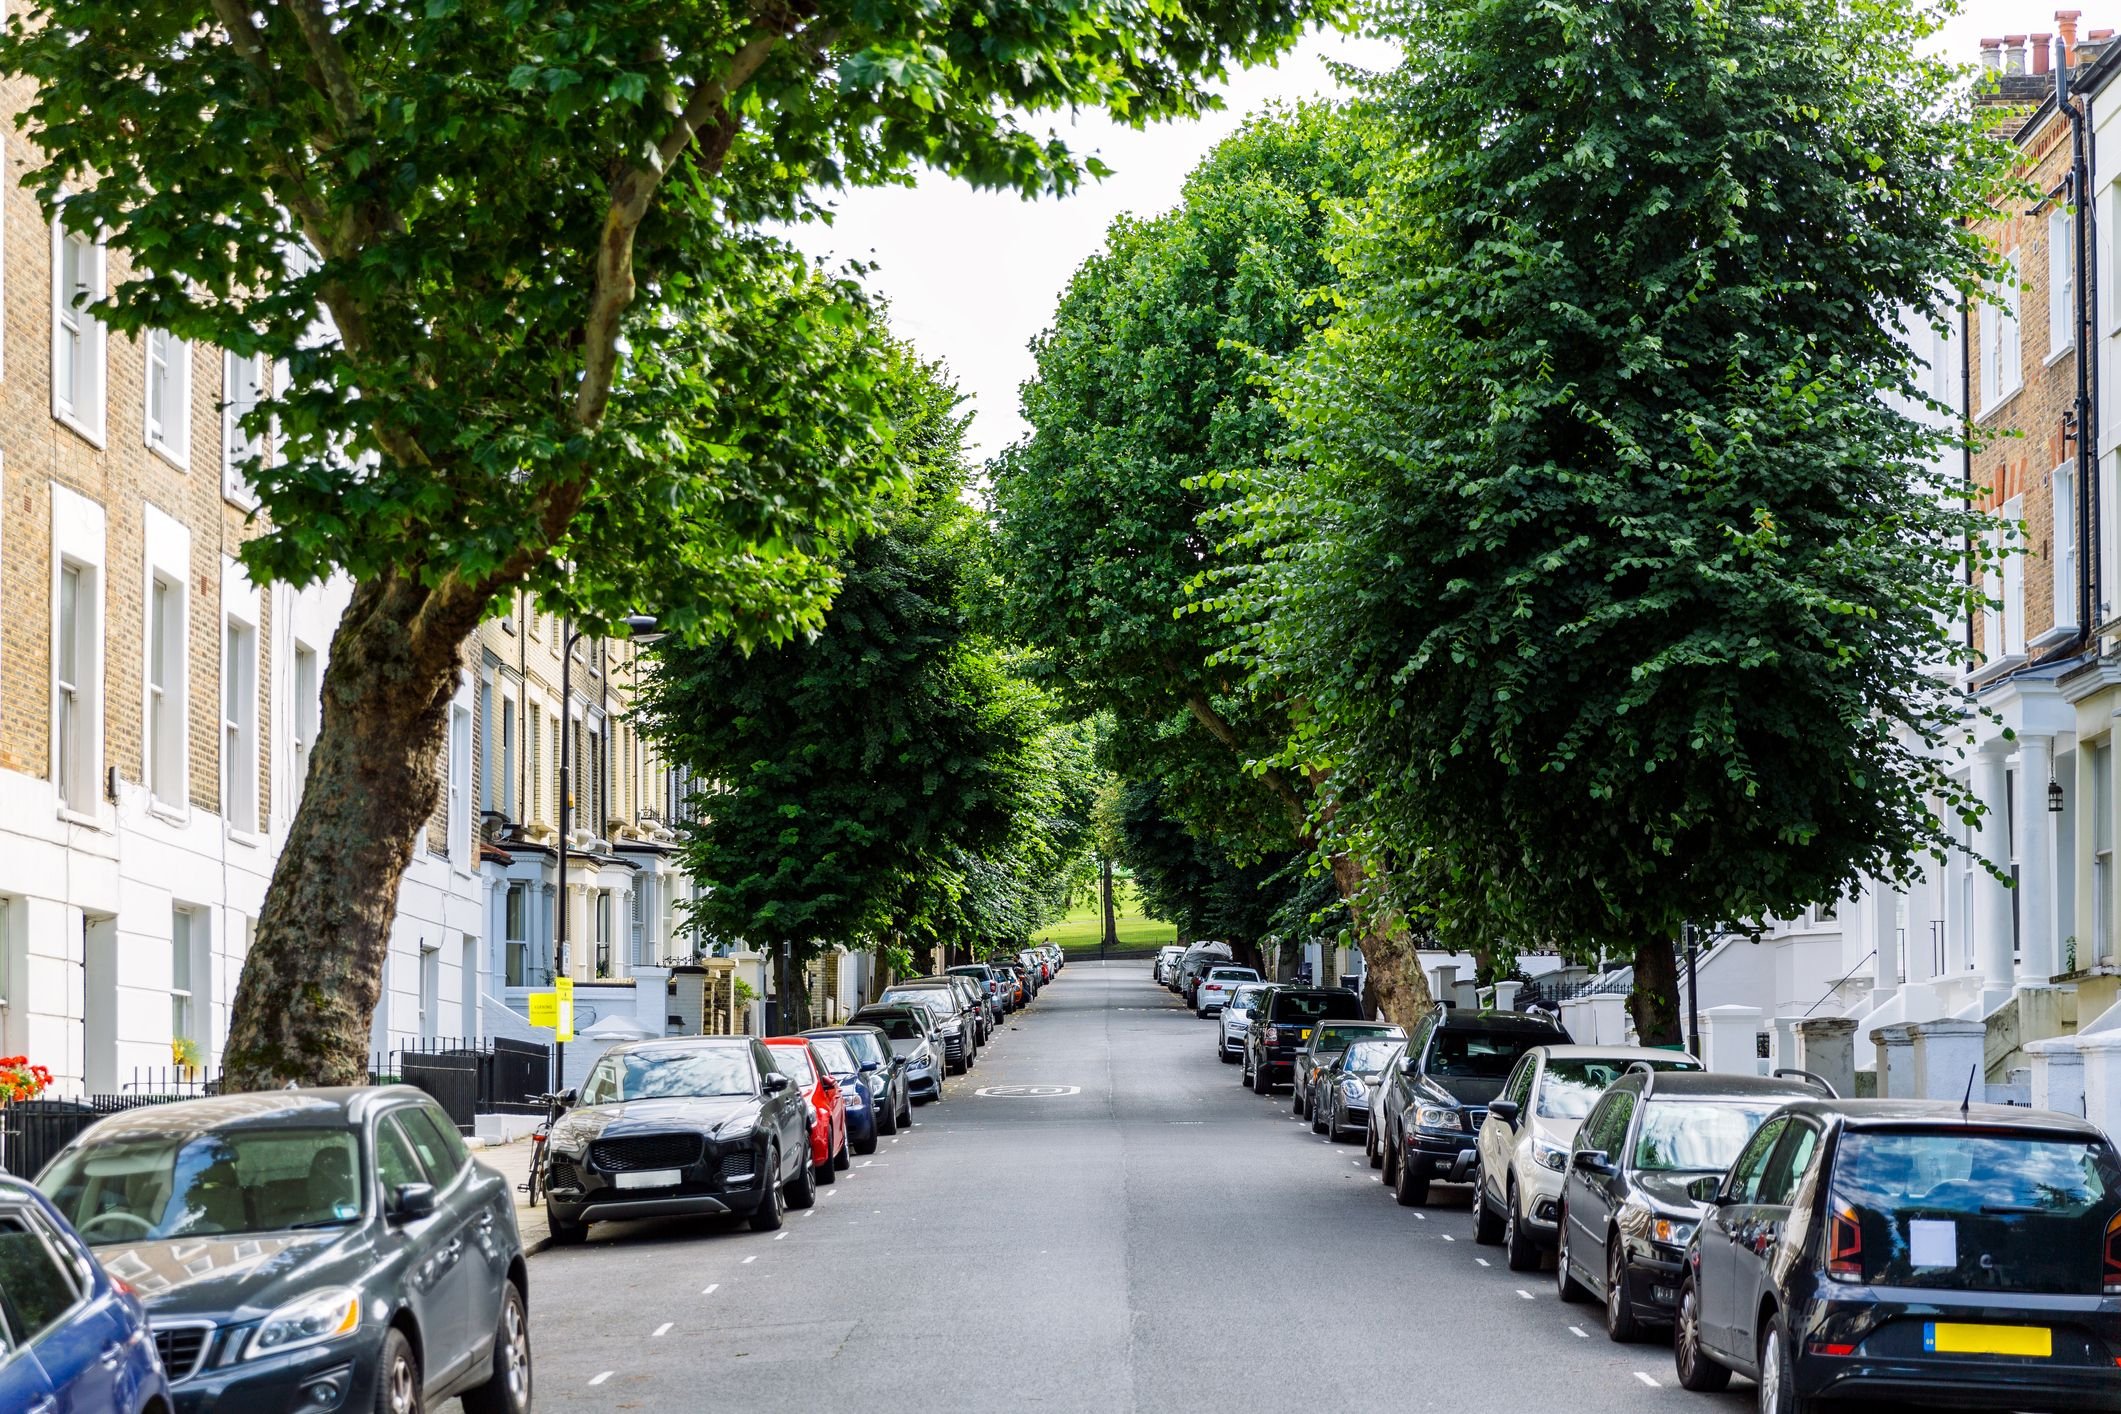 Several cars parked along a street. | Source: Shutterstock